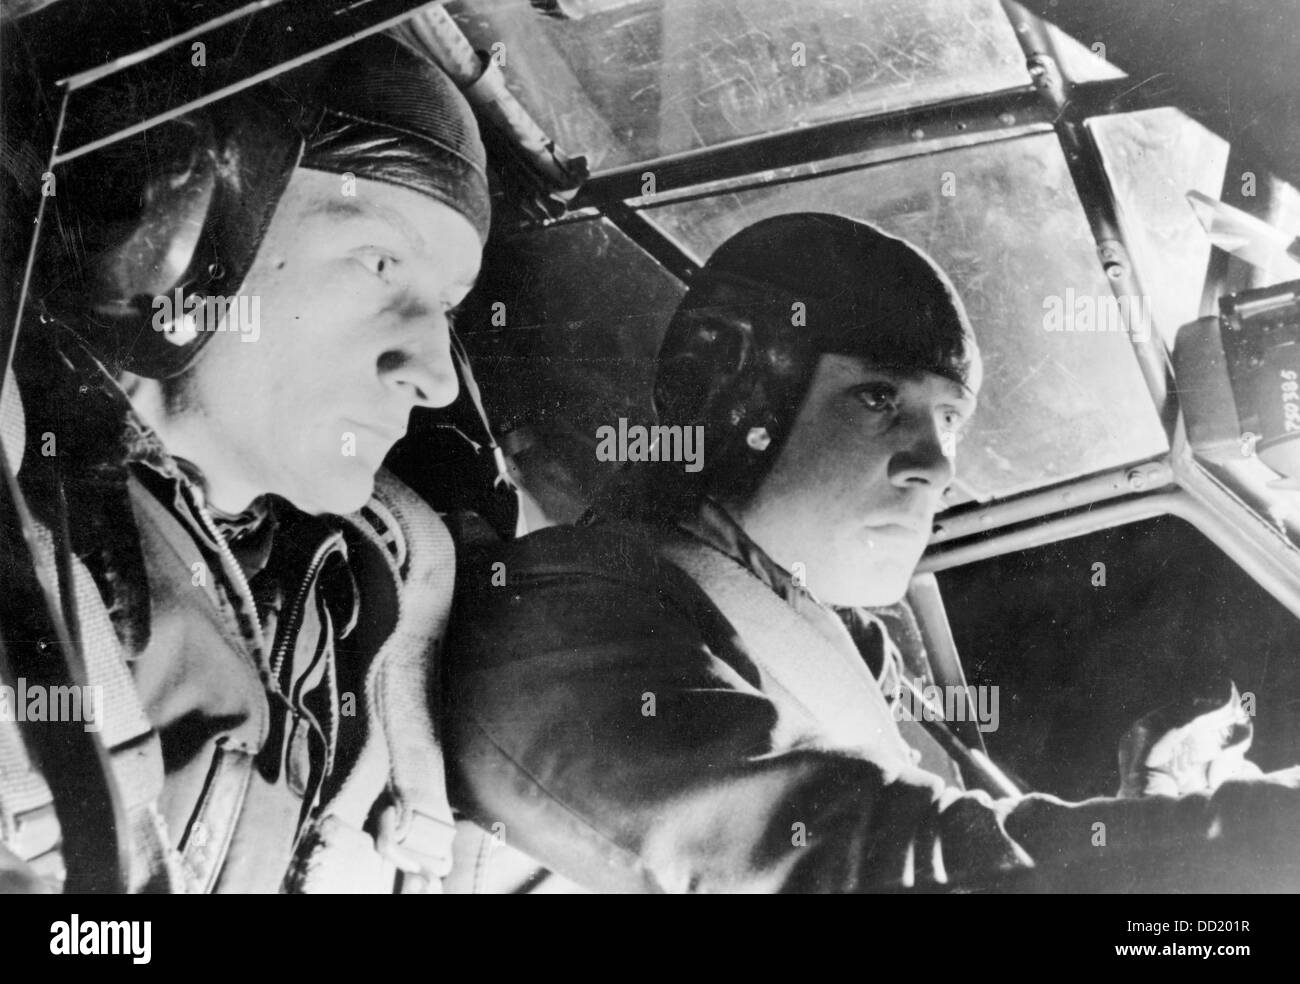 The image from the Nazi Propaganda! shows two pilots during a night operation in the cockpit of their fighter jet in March 1944. Place unknown. Fotoarchiv für Zeitgeschichte Stock Photo